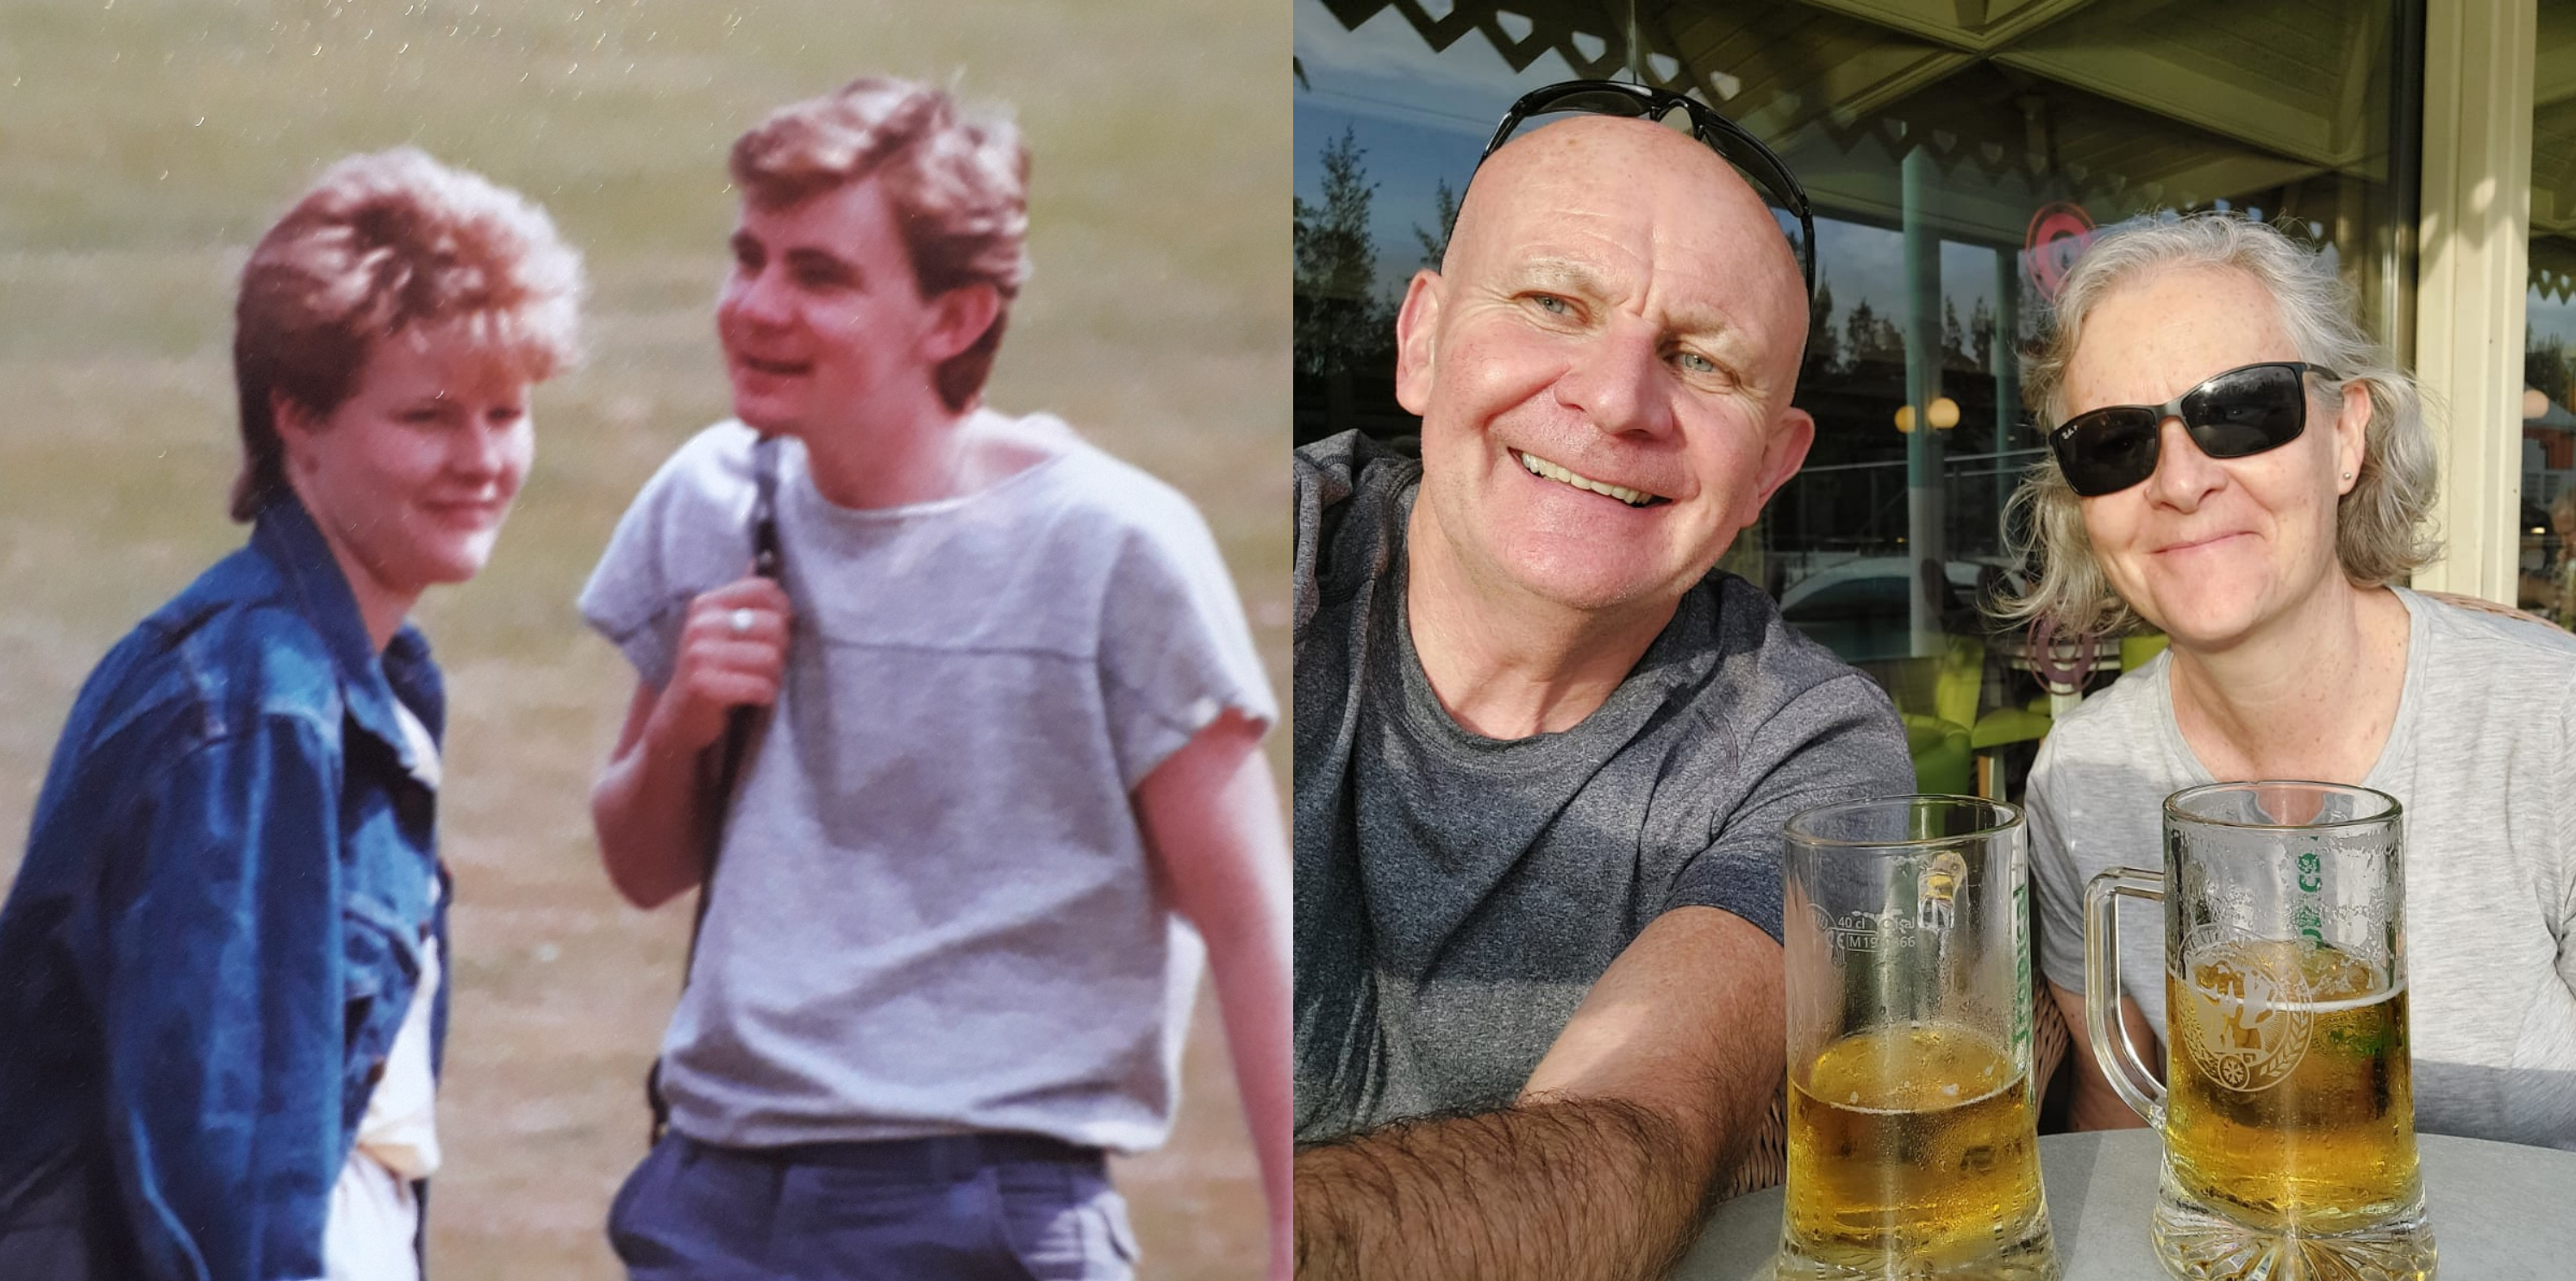 On the left, a photo of Sarah and Adrian in the 1980s. On the right, a more recent photo of them enjoying a drink in the sunshine.